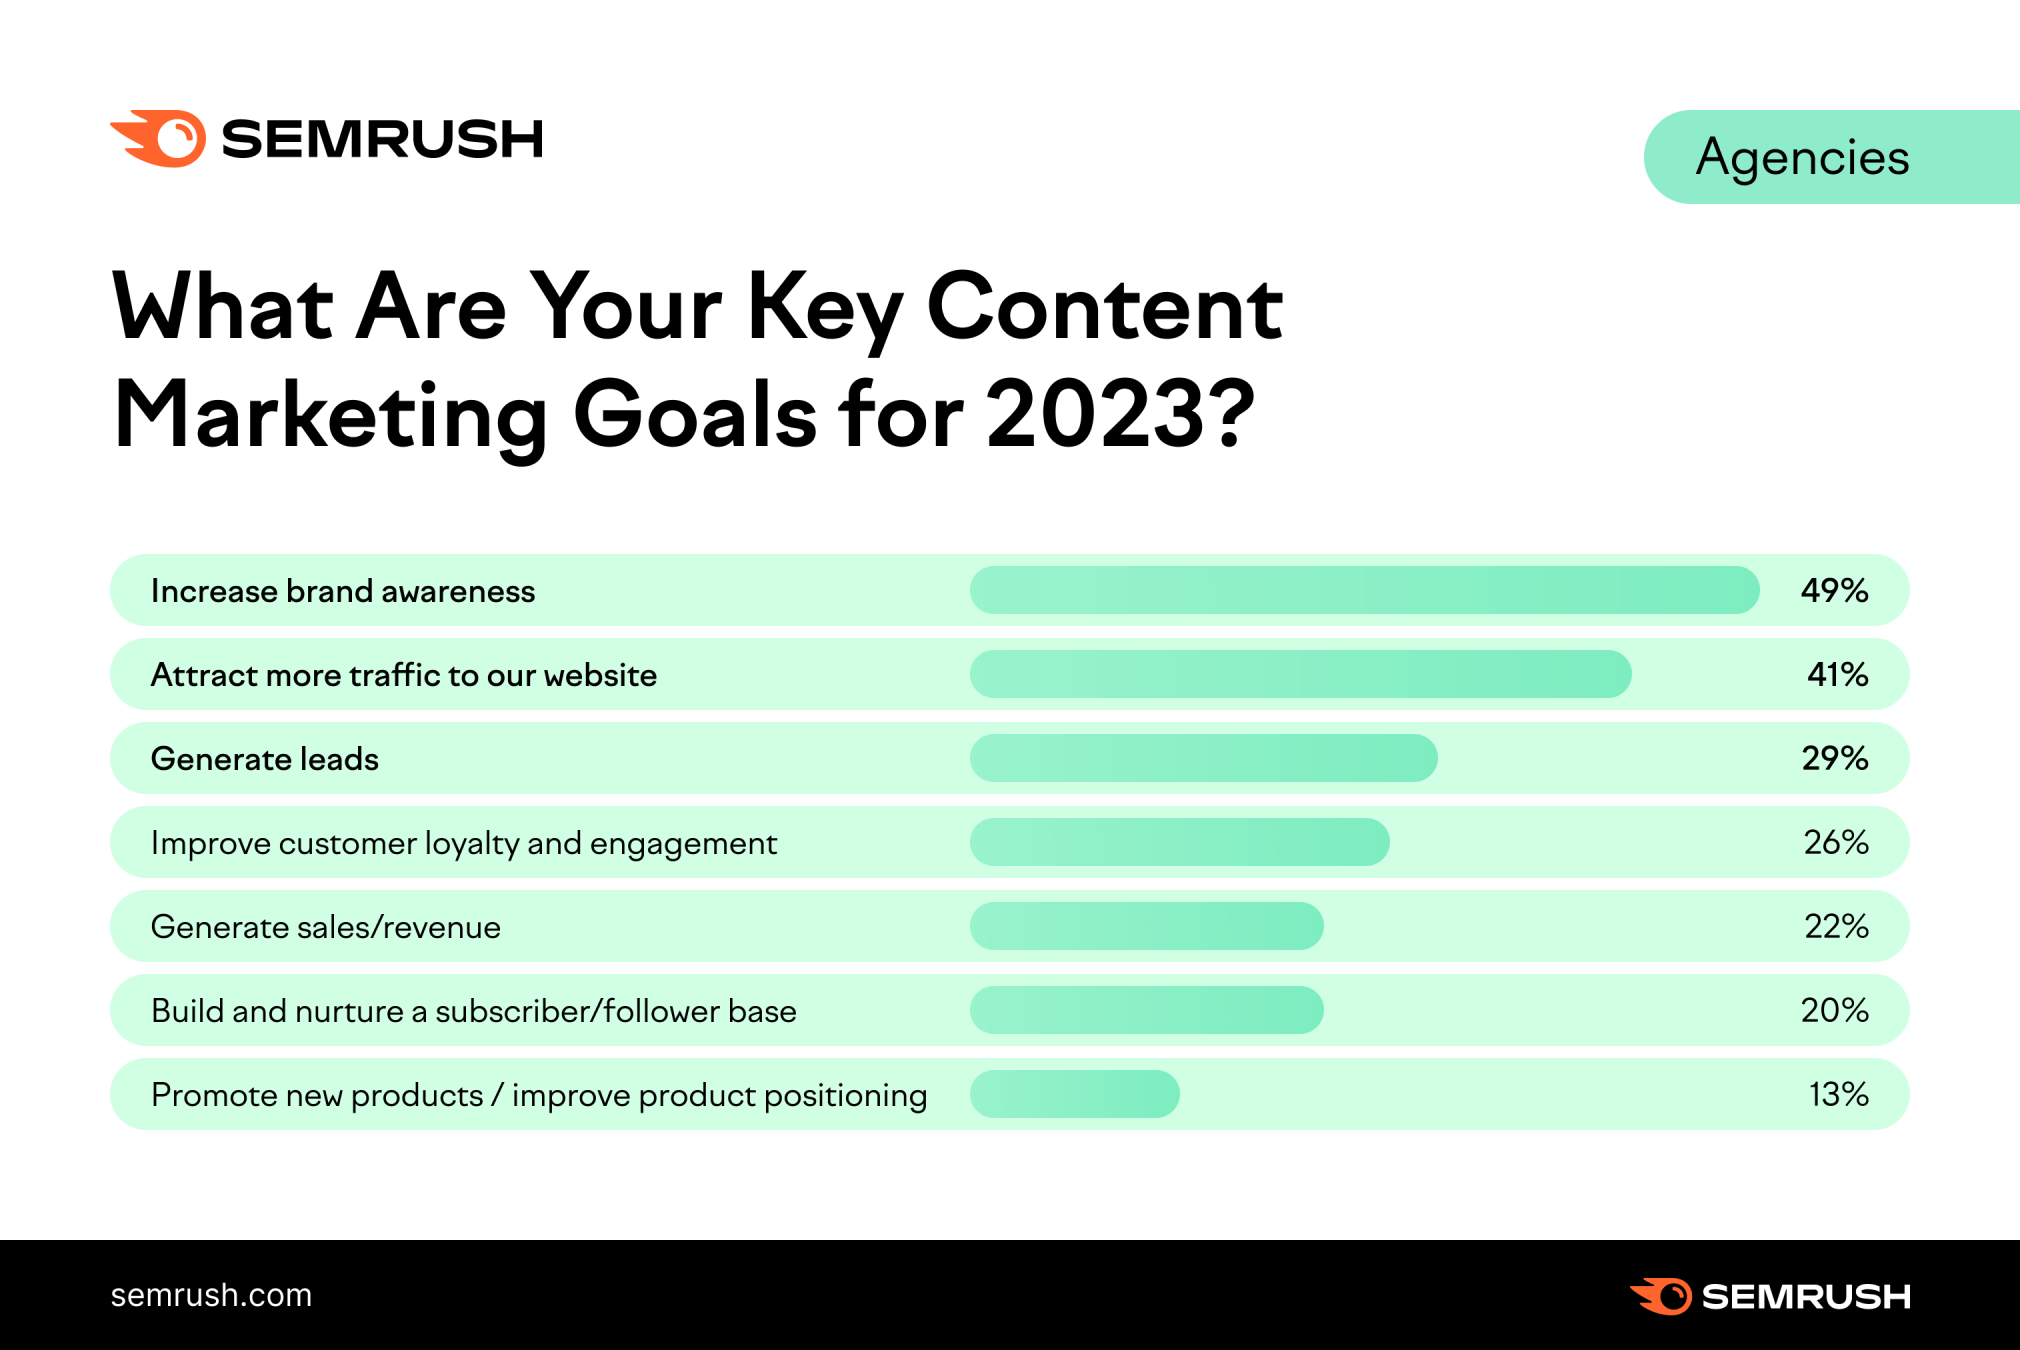 Content marketing goals in 2023 for agencies